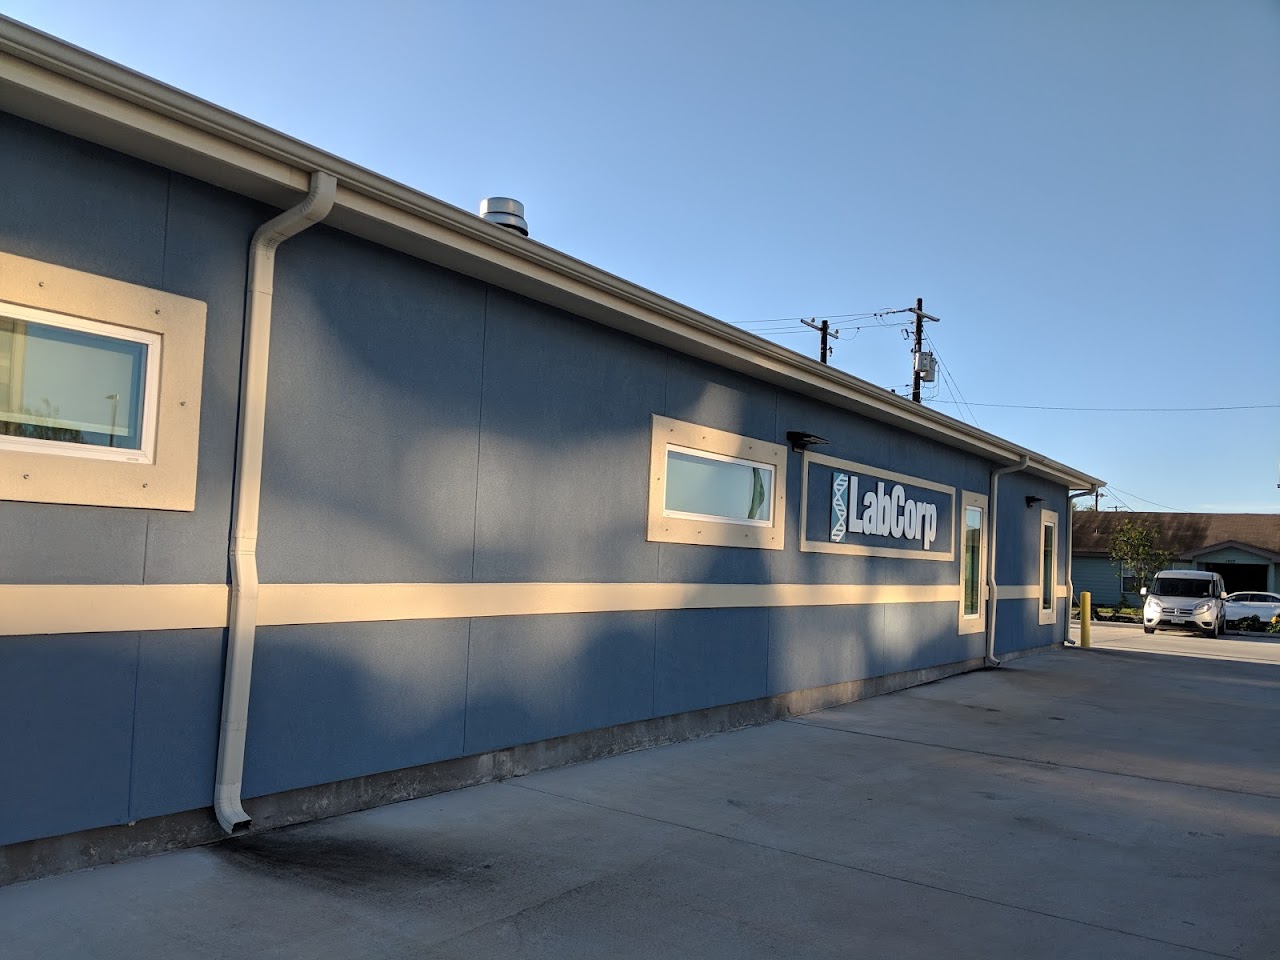 Photo of LabCorp Central City COVID Testing at 1534 S Staples St, Corpus Christi, TX 78404, USA